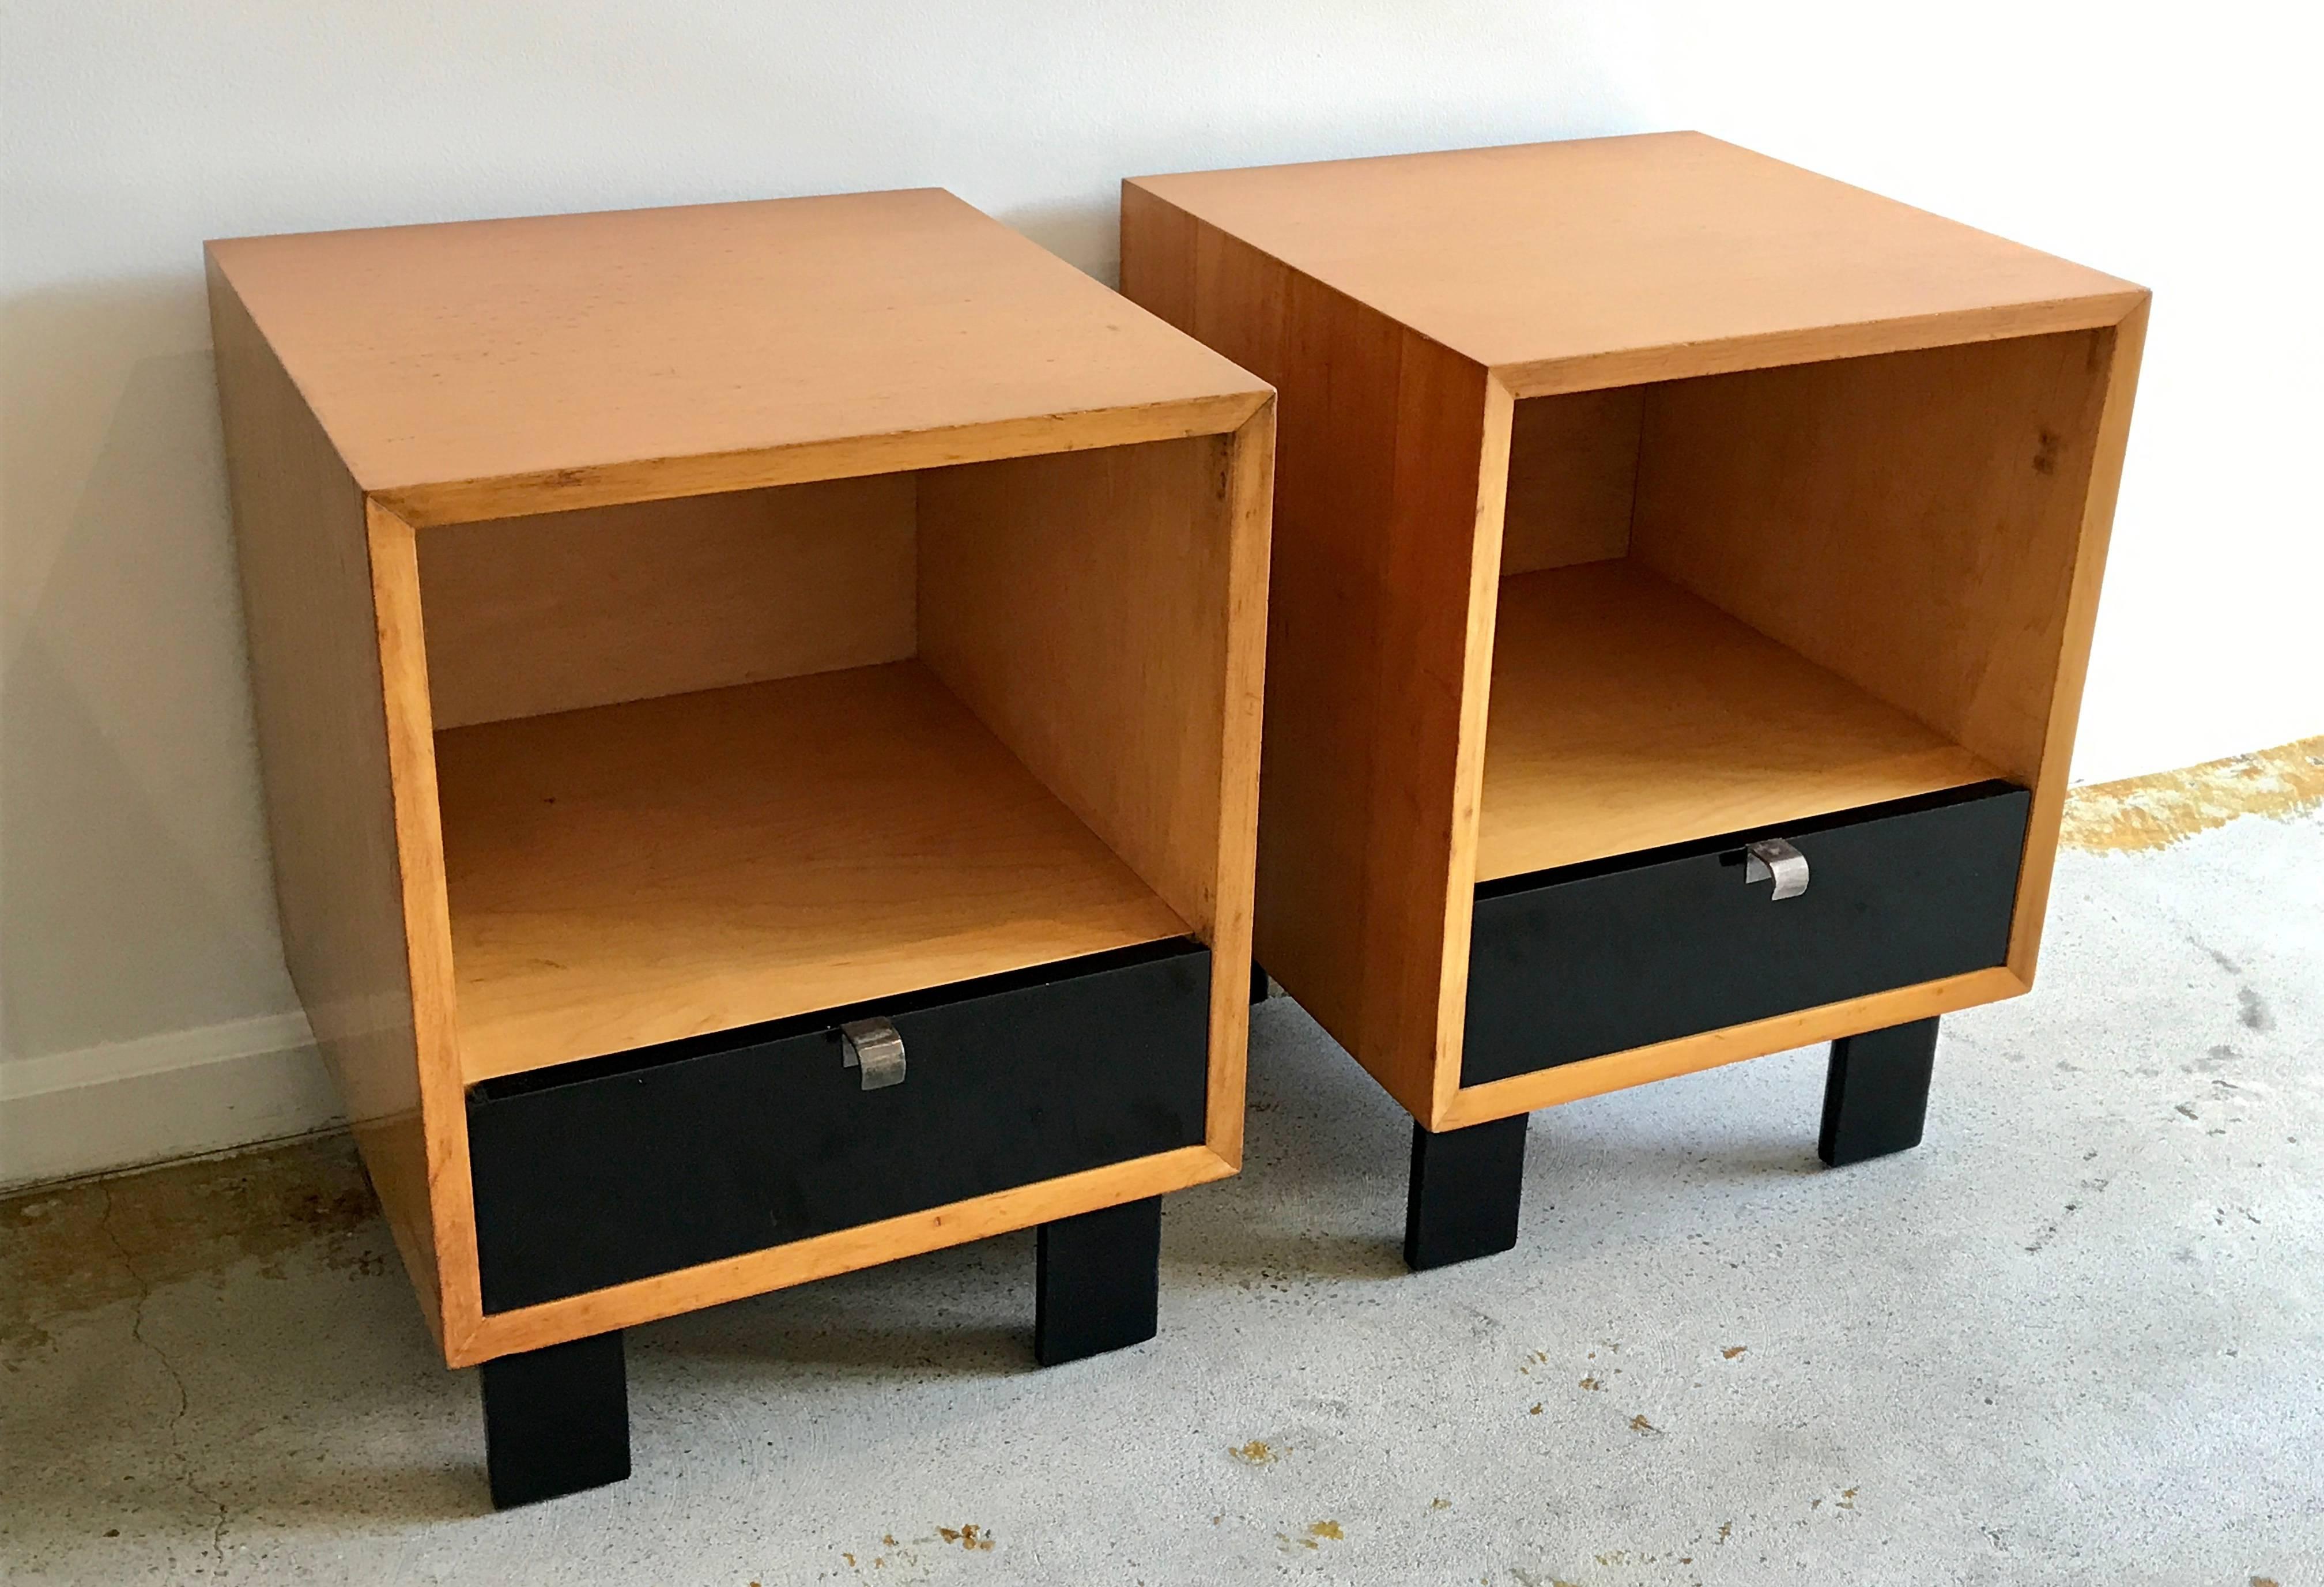 Very cool, and rare, pair of George Nelson night stands in original condition. Single drawer with iconic Nelson designed pull. Wear consistent with age and daily use, please see photos.